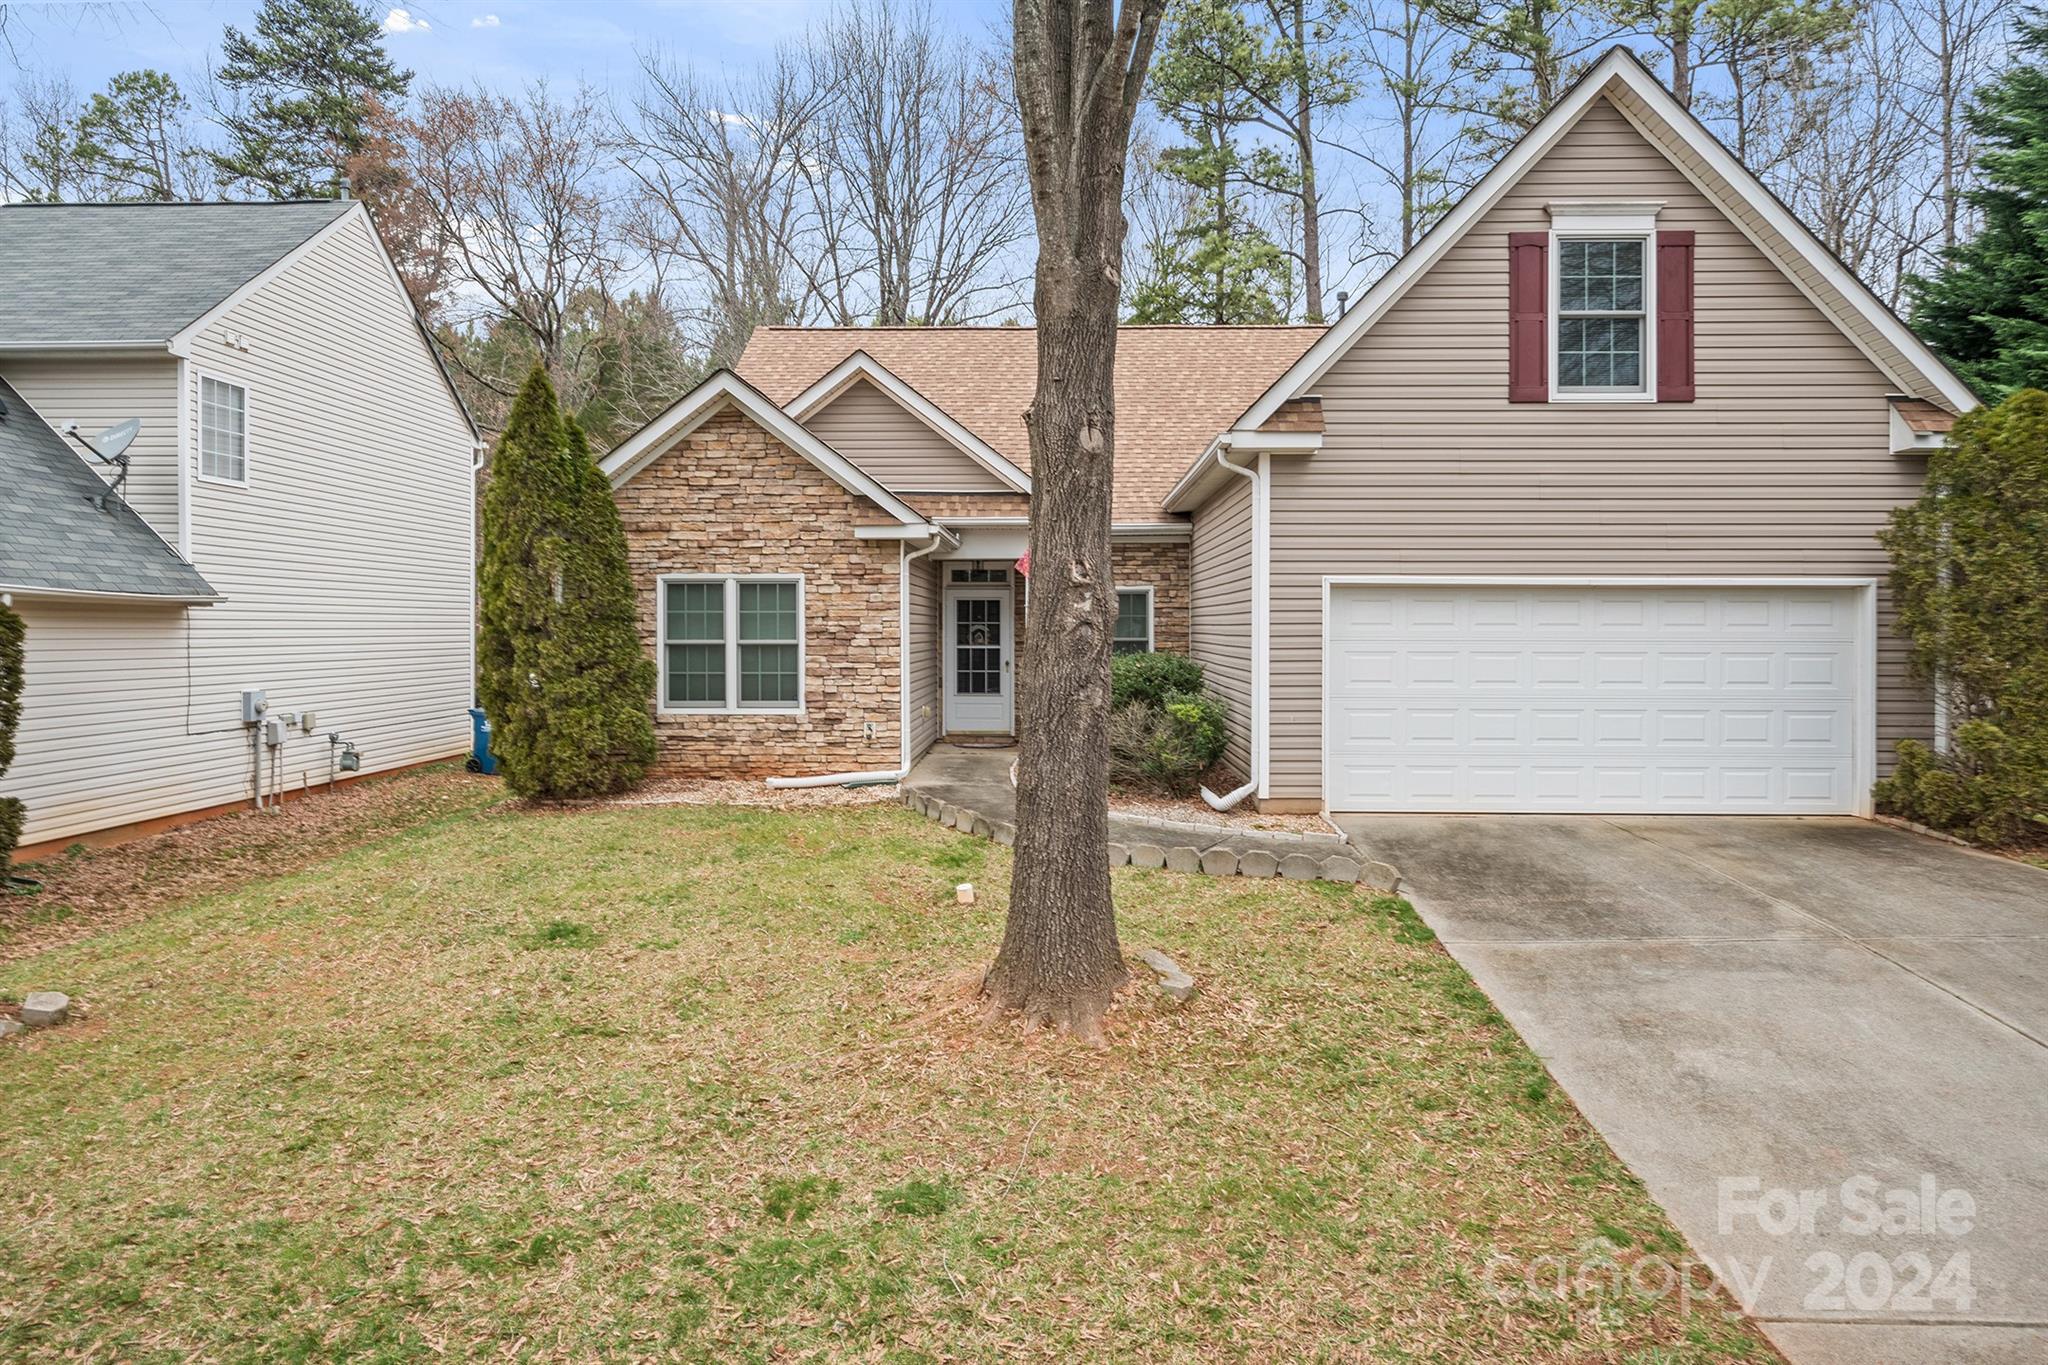 Photo one of 1219 Oakdale Commons Ct Charlotte NC 28216 | MLS 4113008